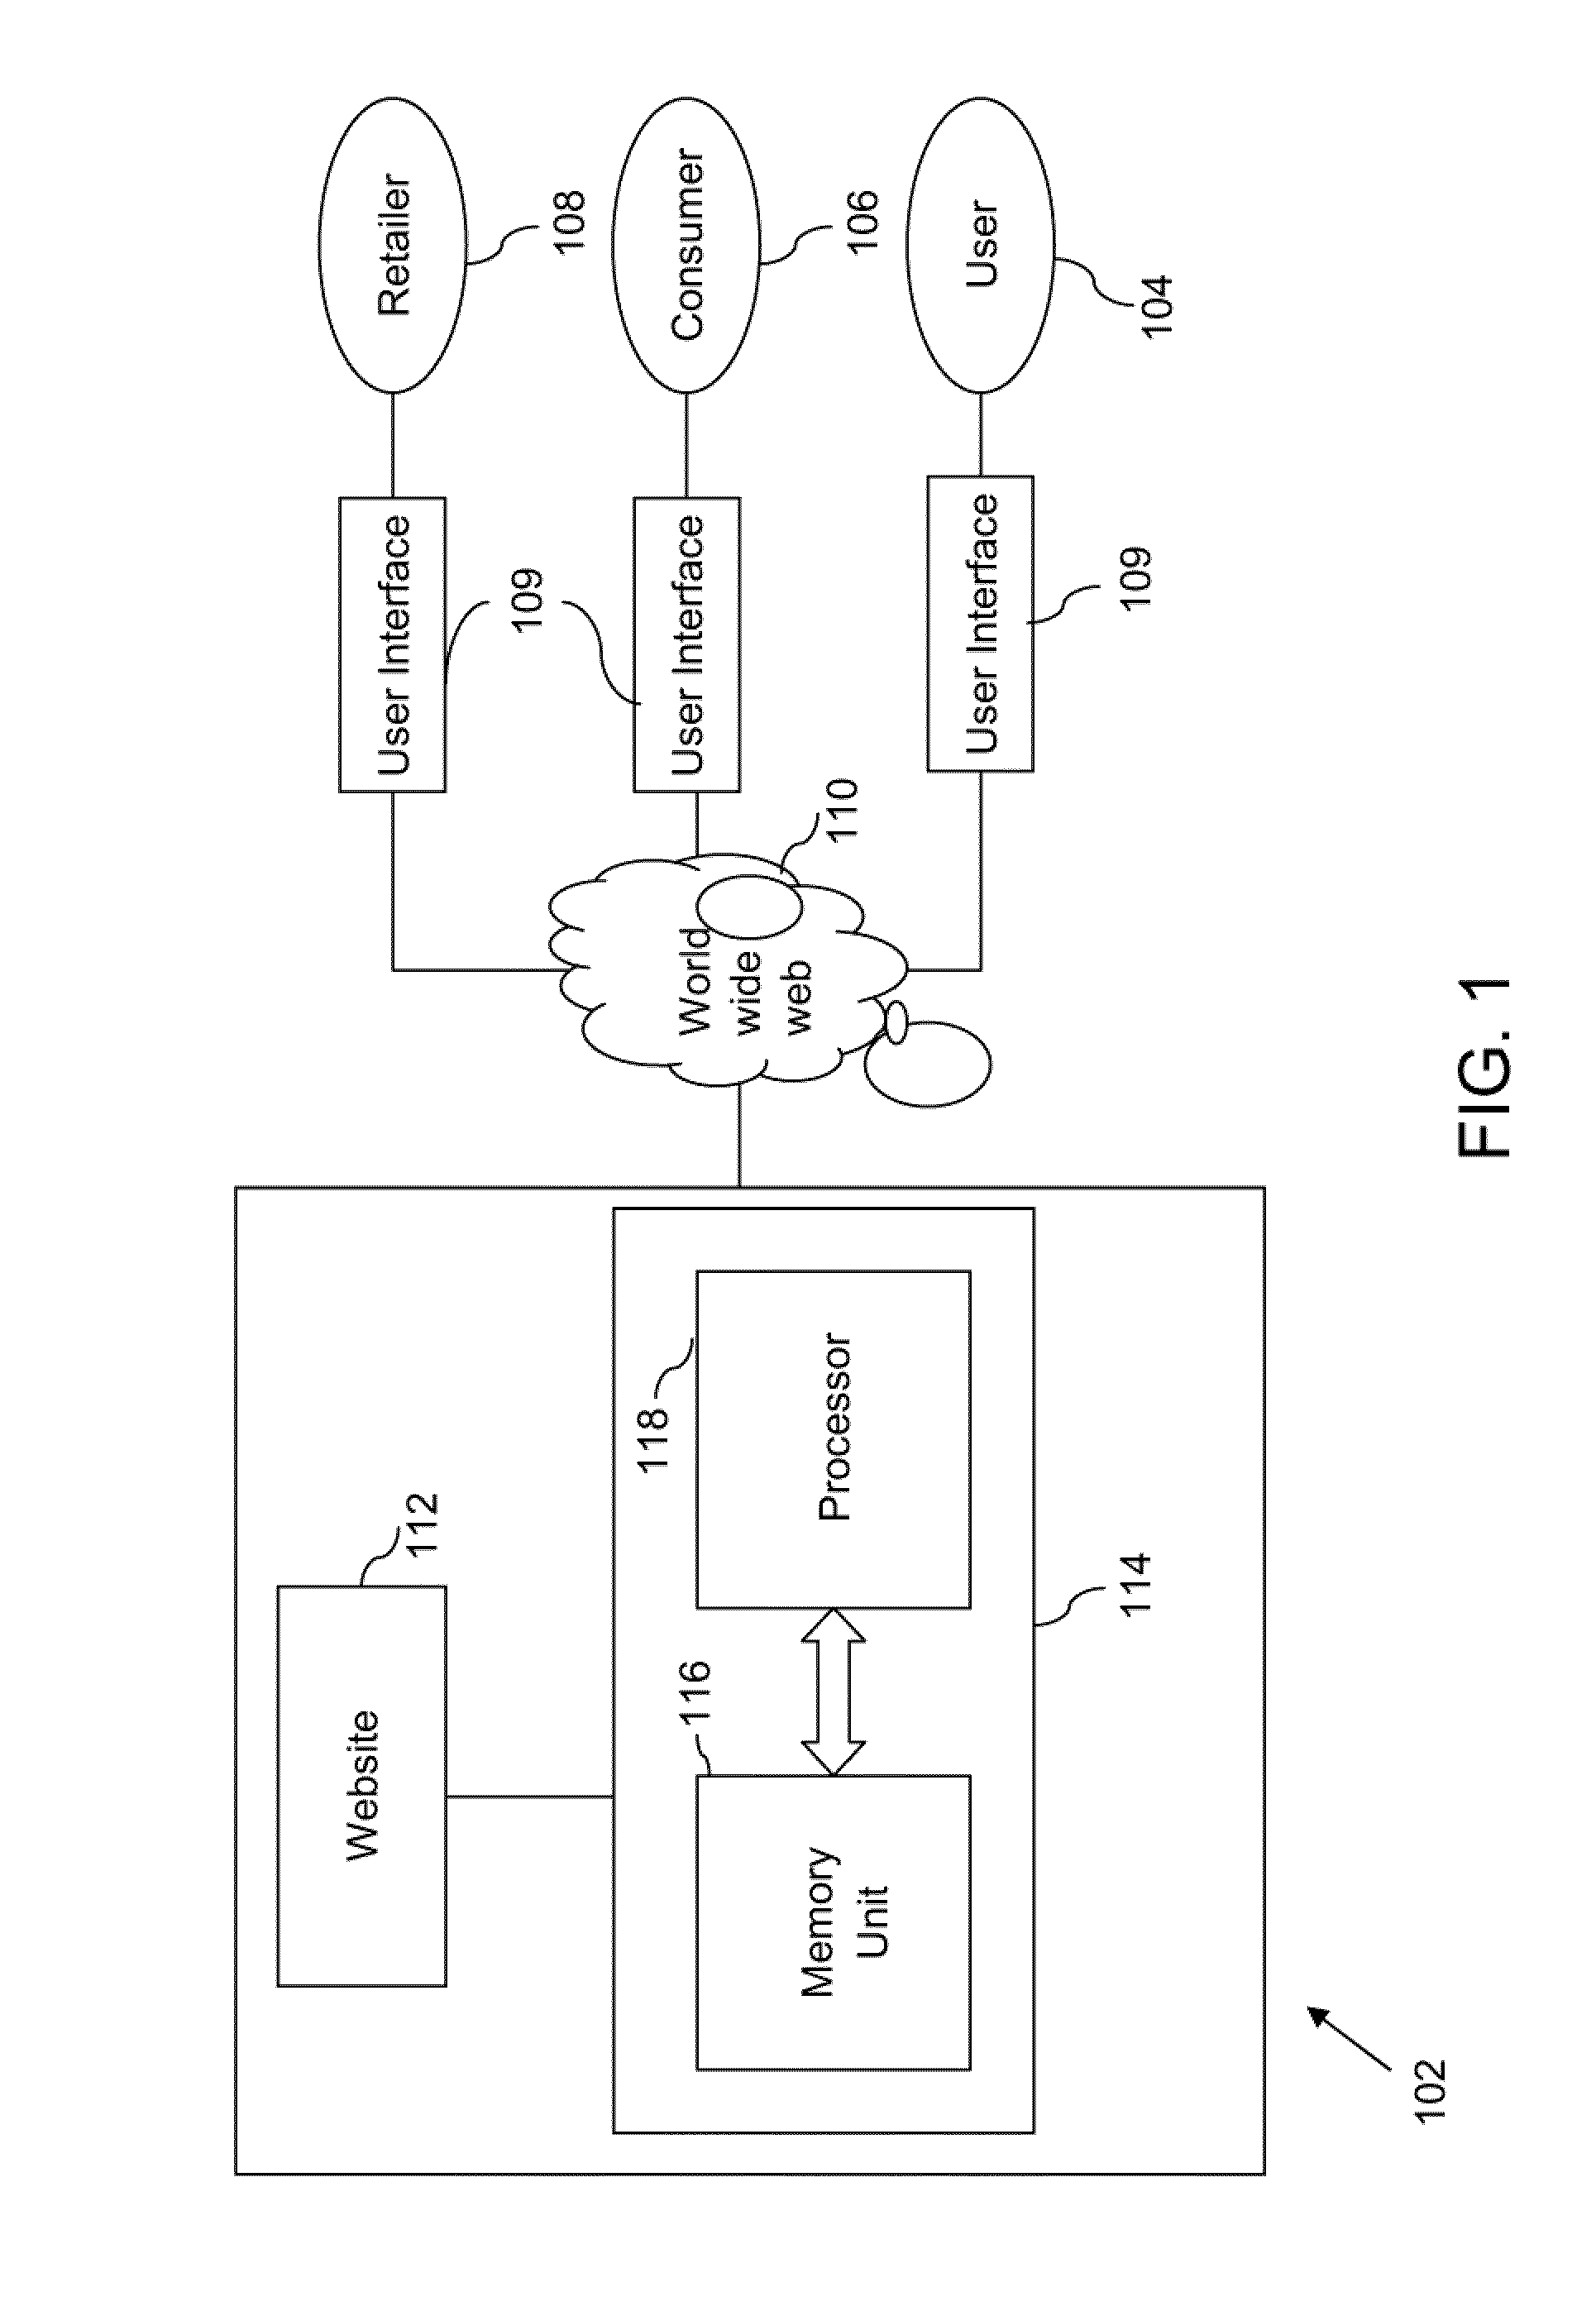 Method and system for target marketing and category based search